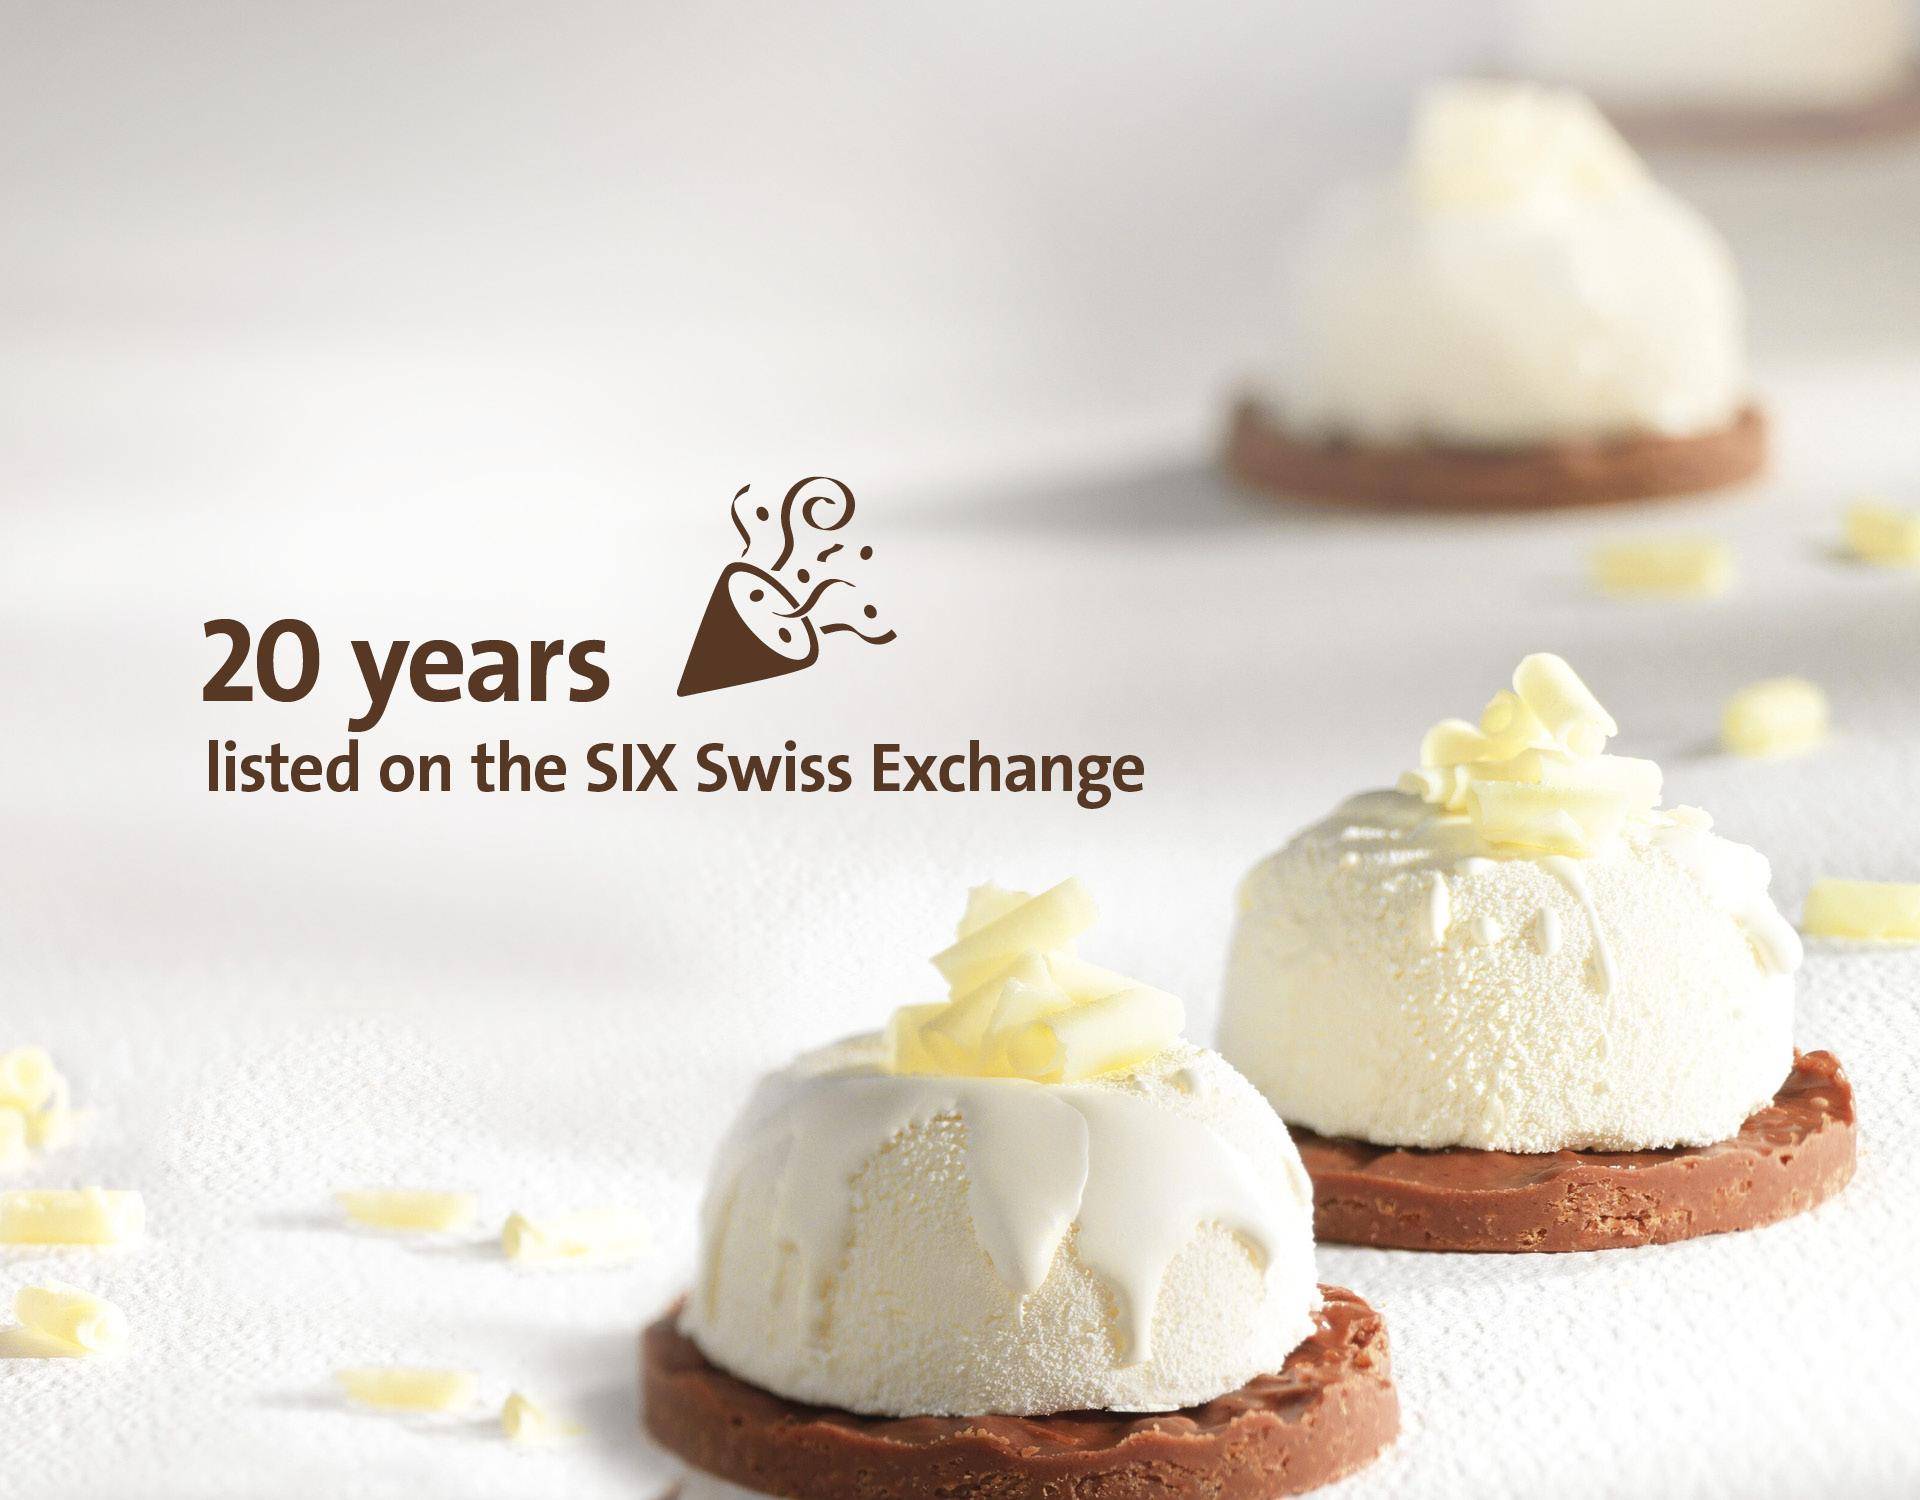 Image Slider 20 years SIX Swiss Exchange Fiscal Year 2017/18 Barry Callebaut Group